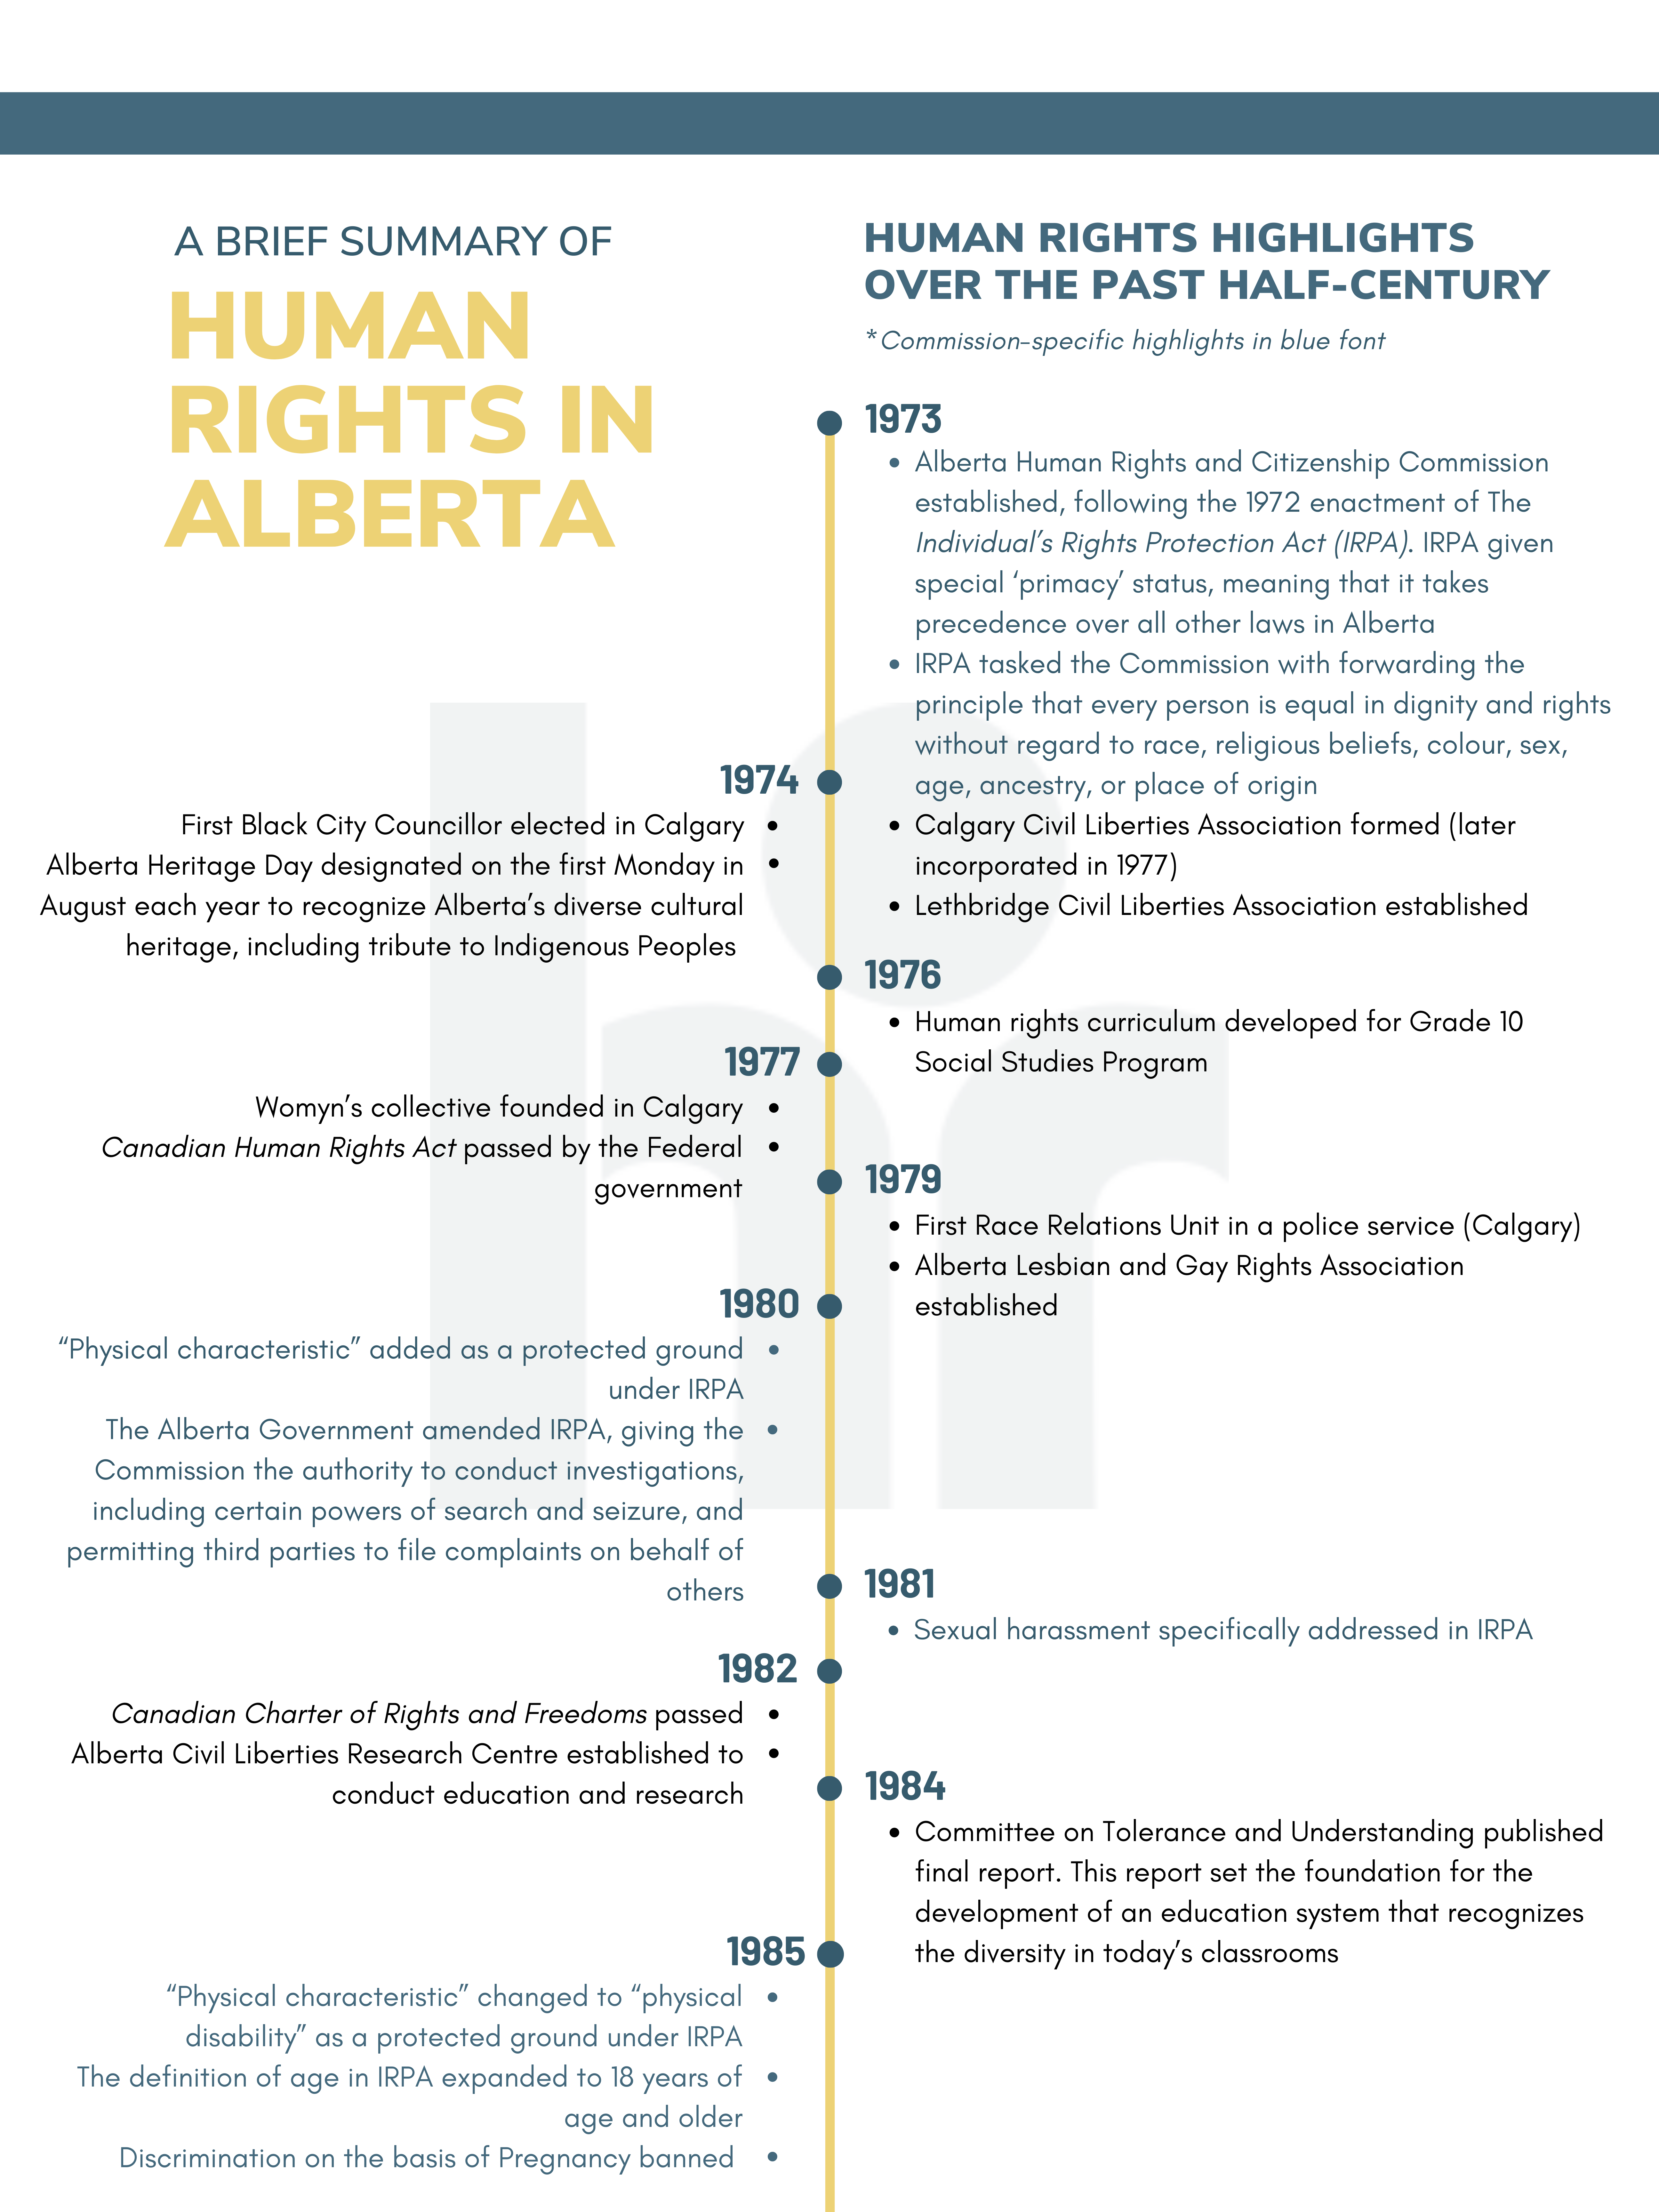 Timeline from 1973 to 1985 describing significant events in Alberta's human rights history. See link at top of page for full text.